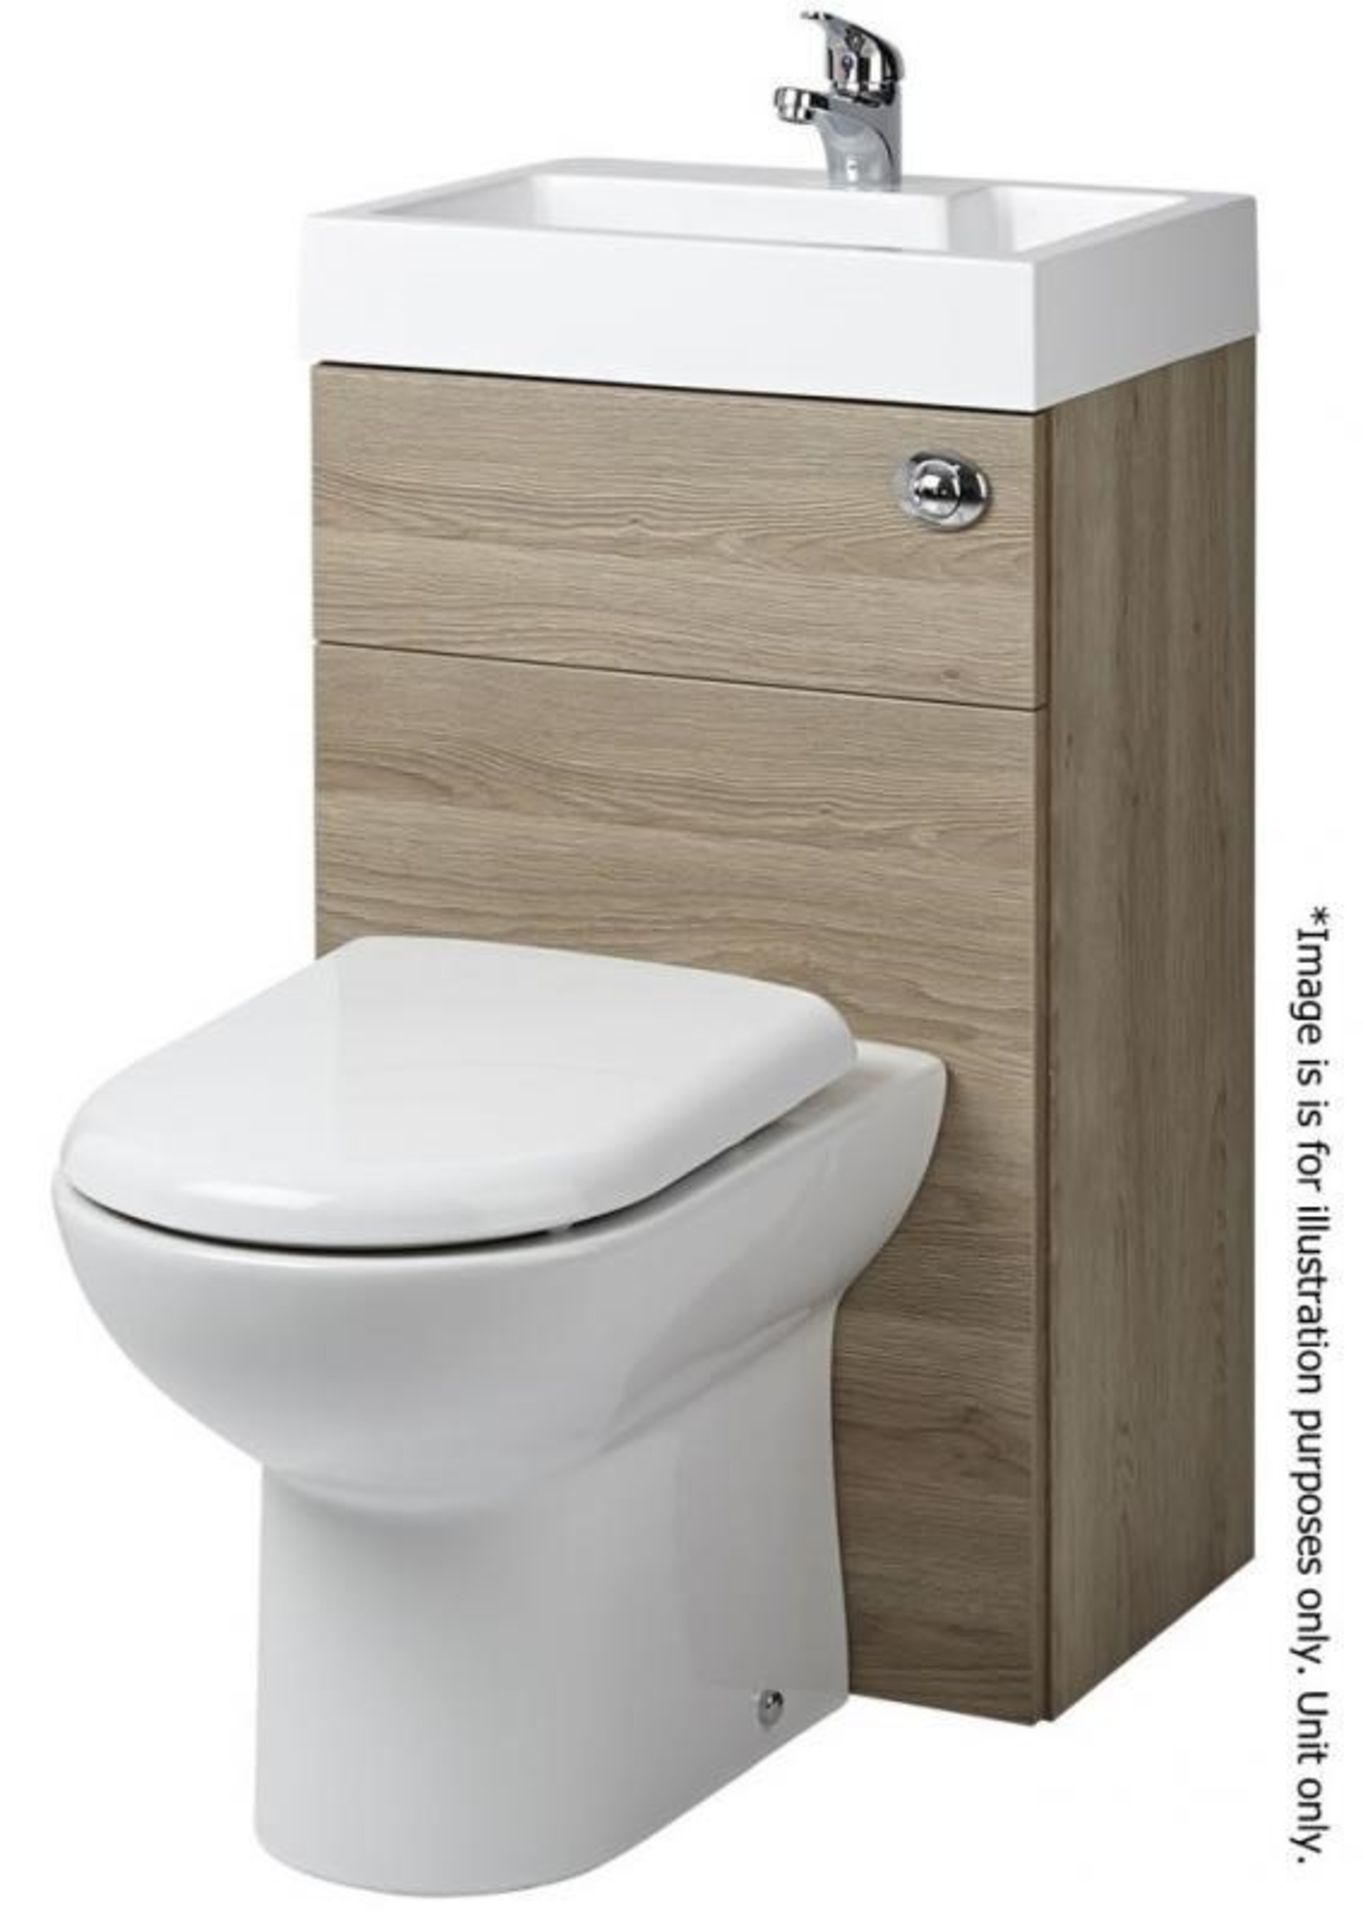 1 x Combination Reversible Toilet & Basin Unit With An Oak Finish **Pan & Basin Not Included**